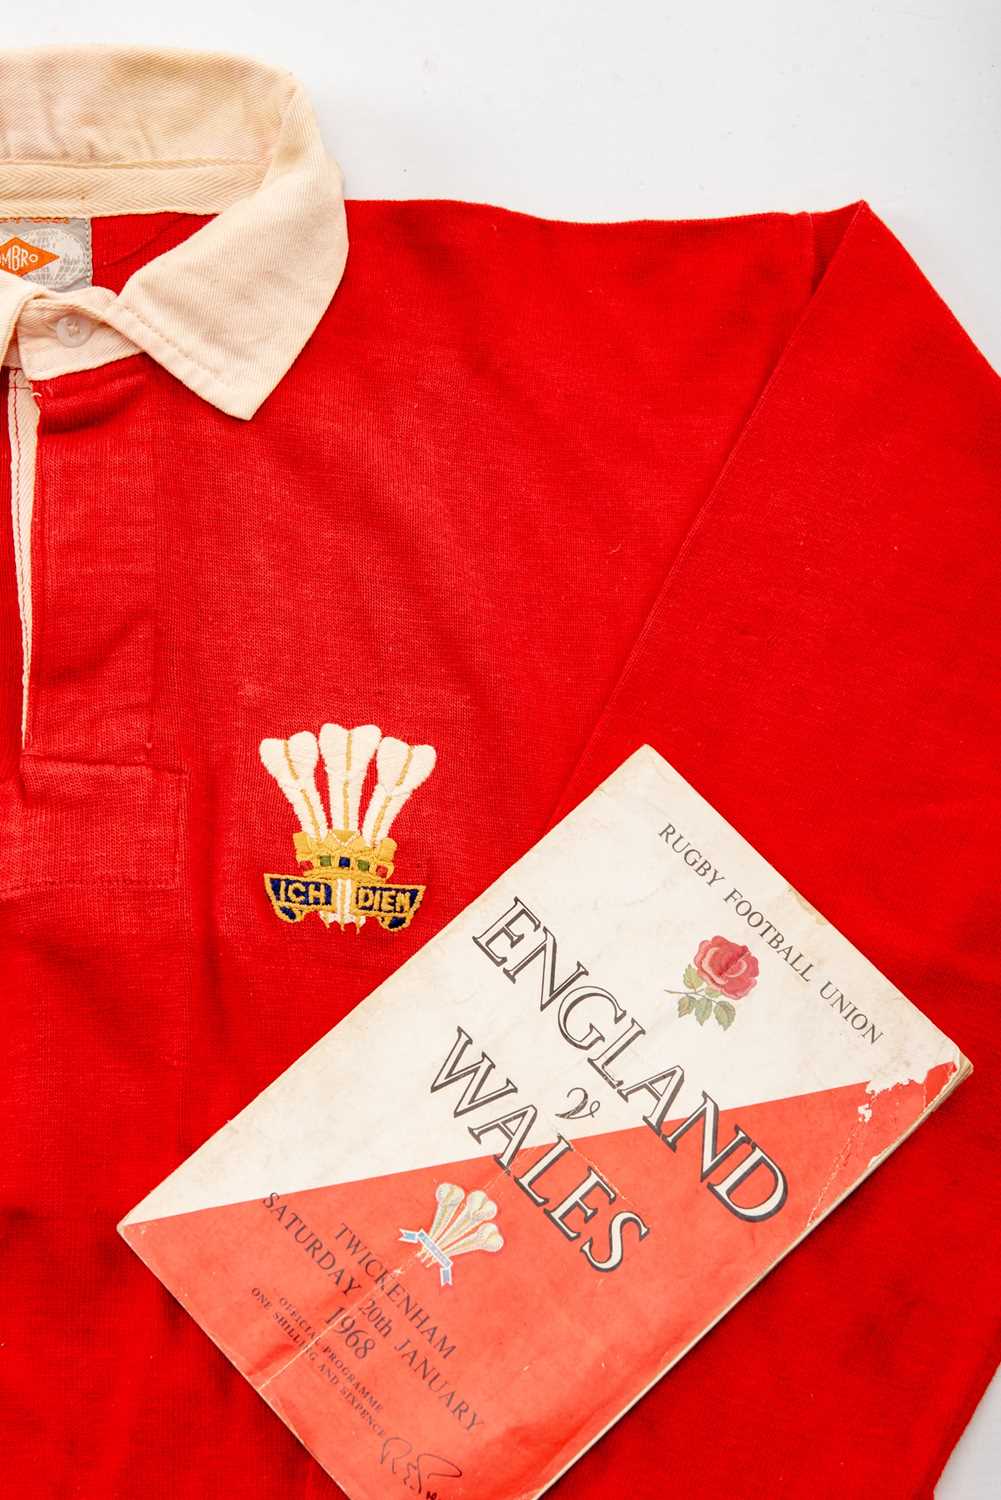 NORMAN GALE | WALES A match-worn Wales International rugby union jersey worn by former captain,